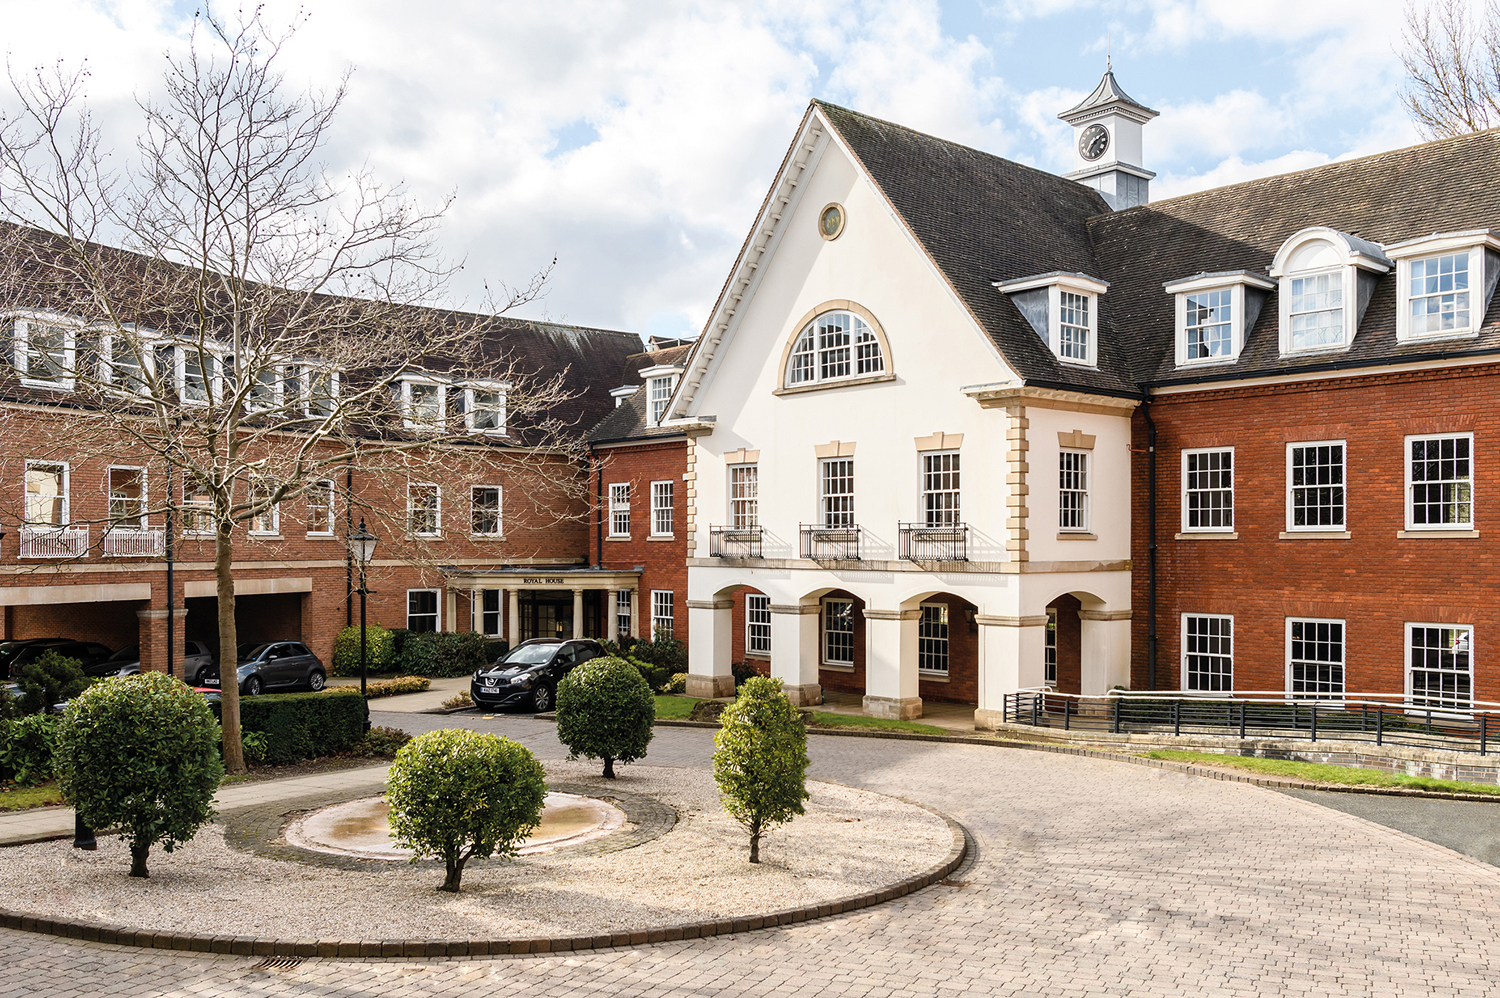 Elevate Property Group acquires Princes Gate in Solihull